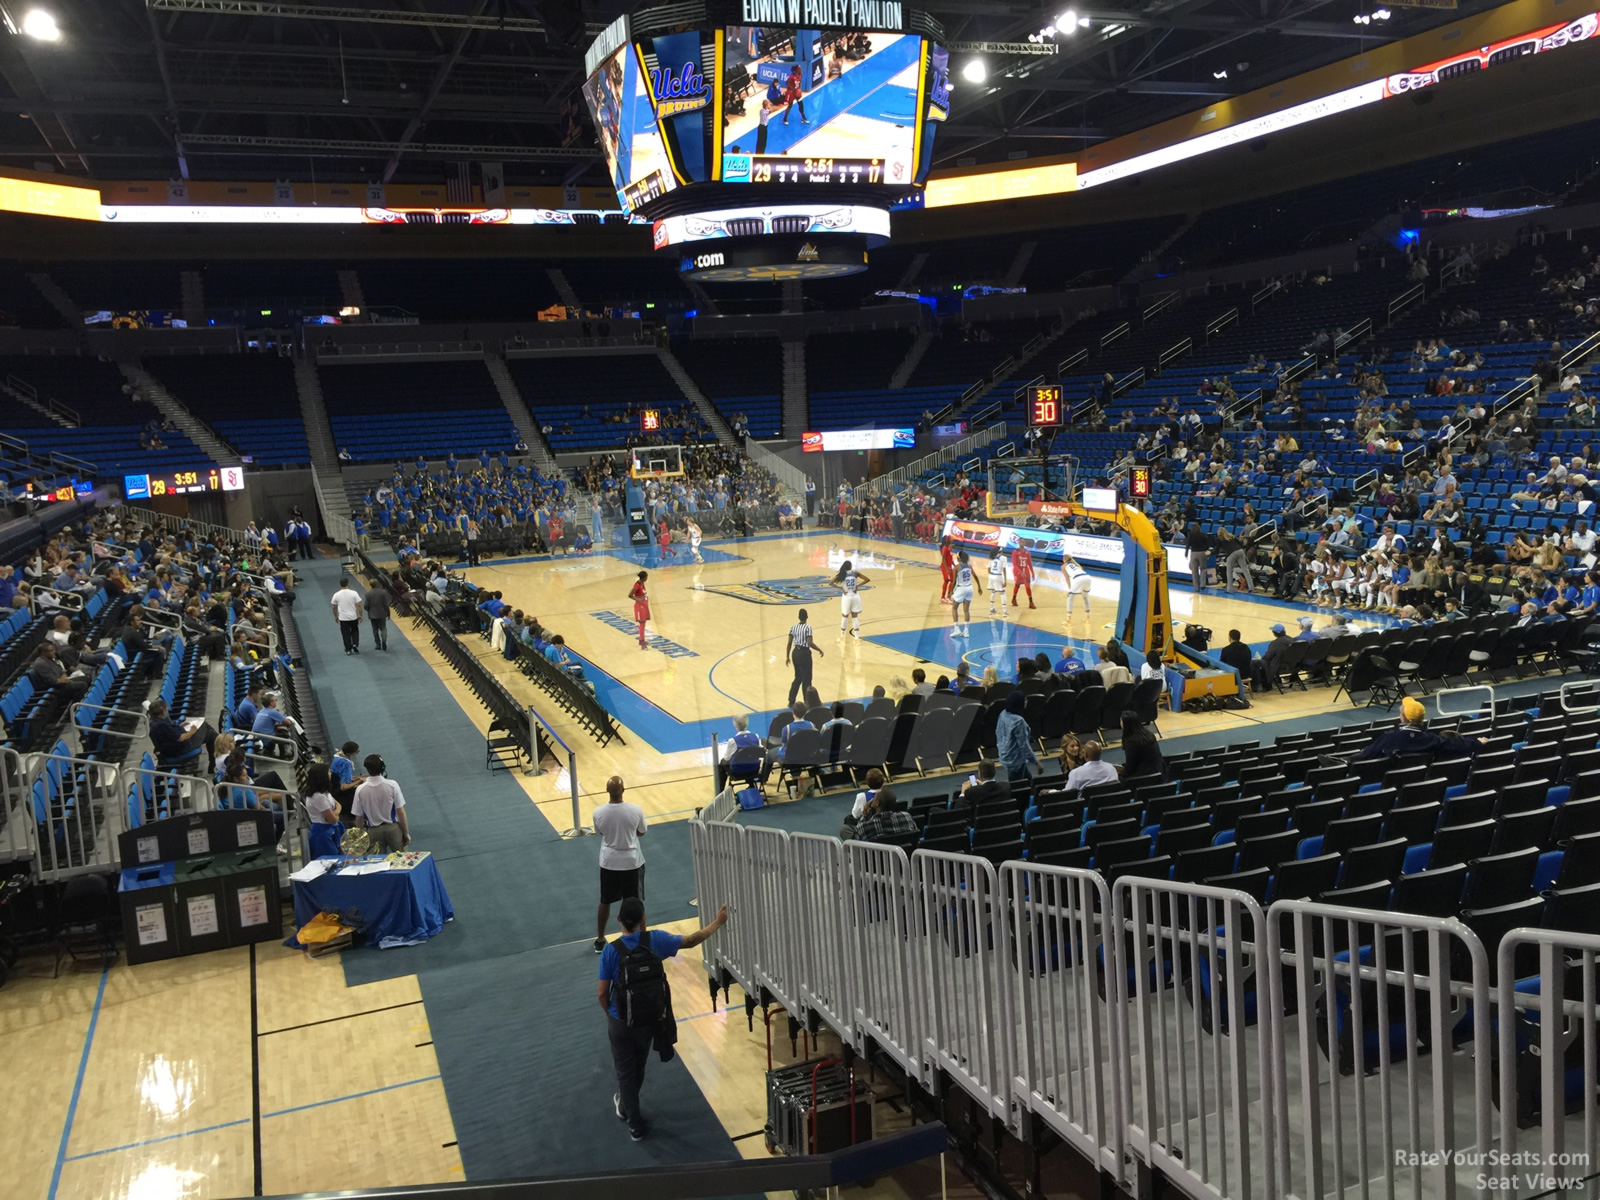 section 110, row 3 seat view  - pauley pavilion